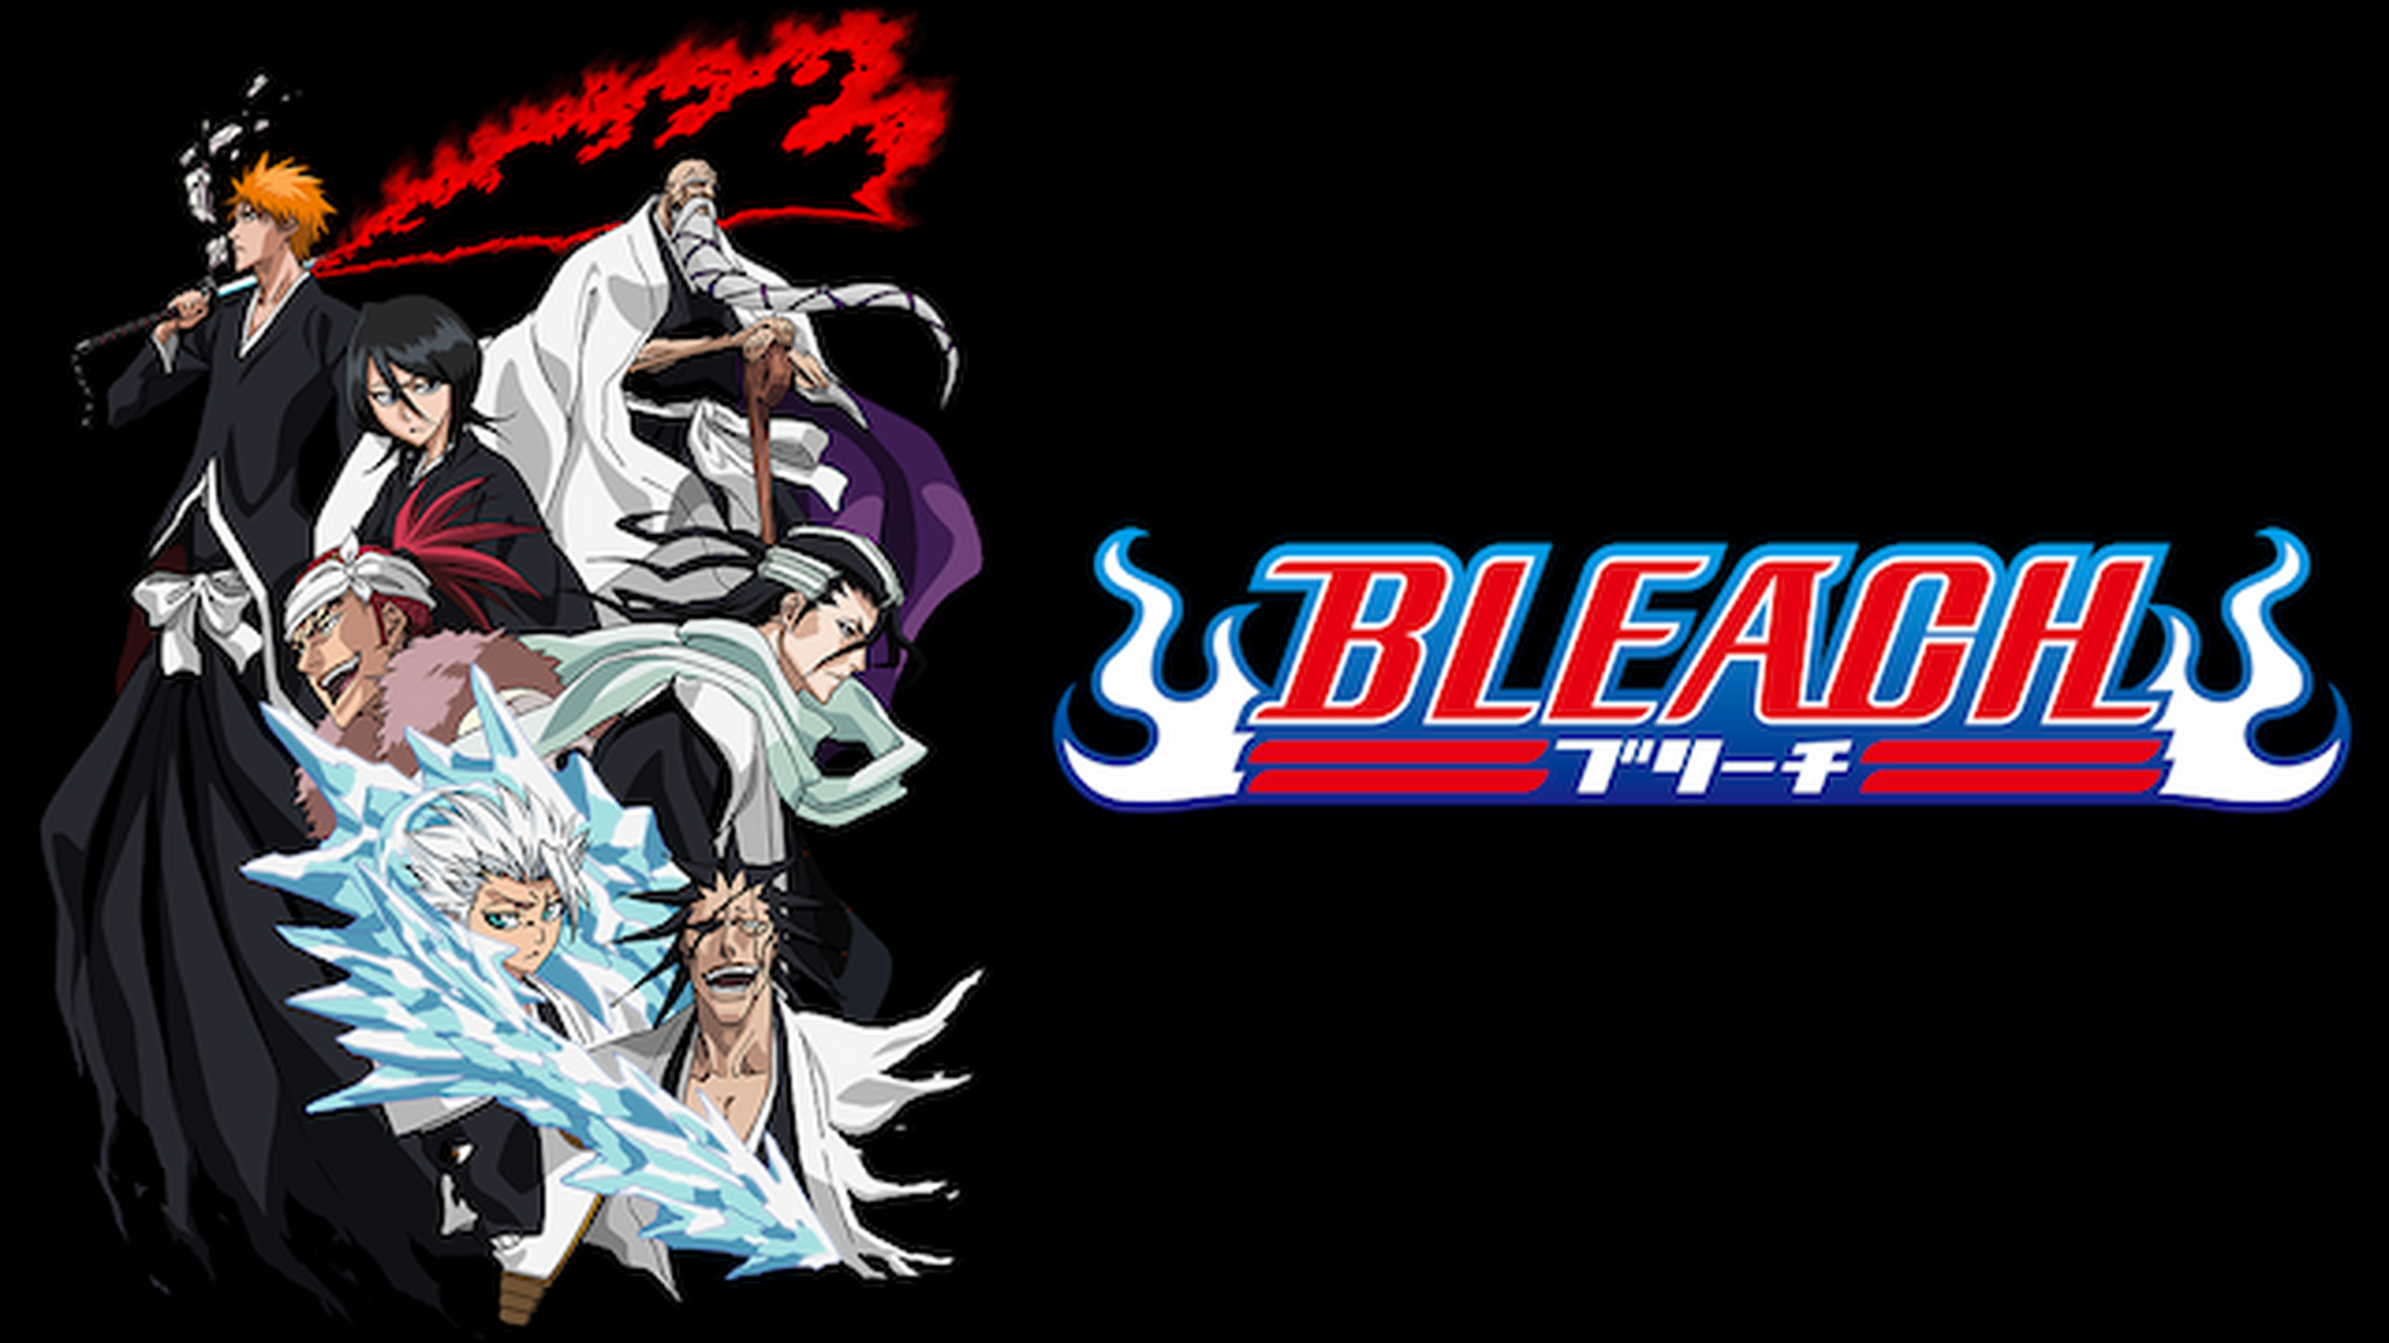 Bleach Can T Fear Your Own World 電子書籍 マンガ読むならu Next 初回600円分無料 U Next